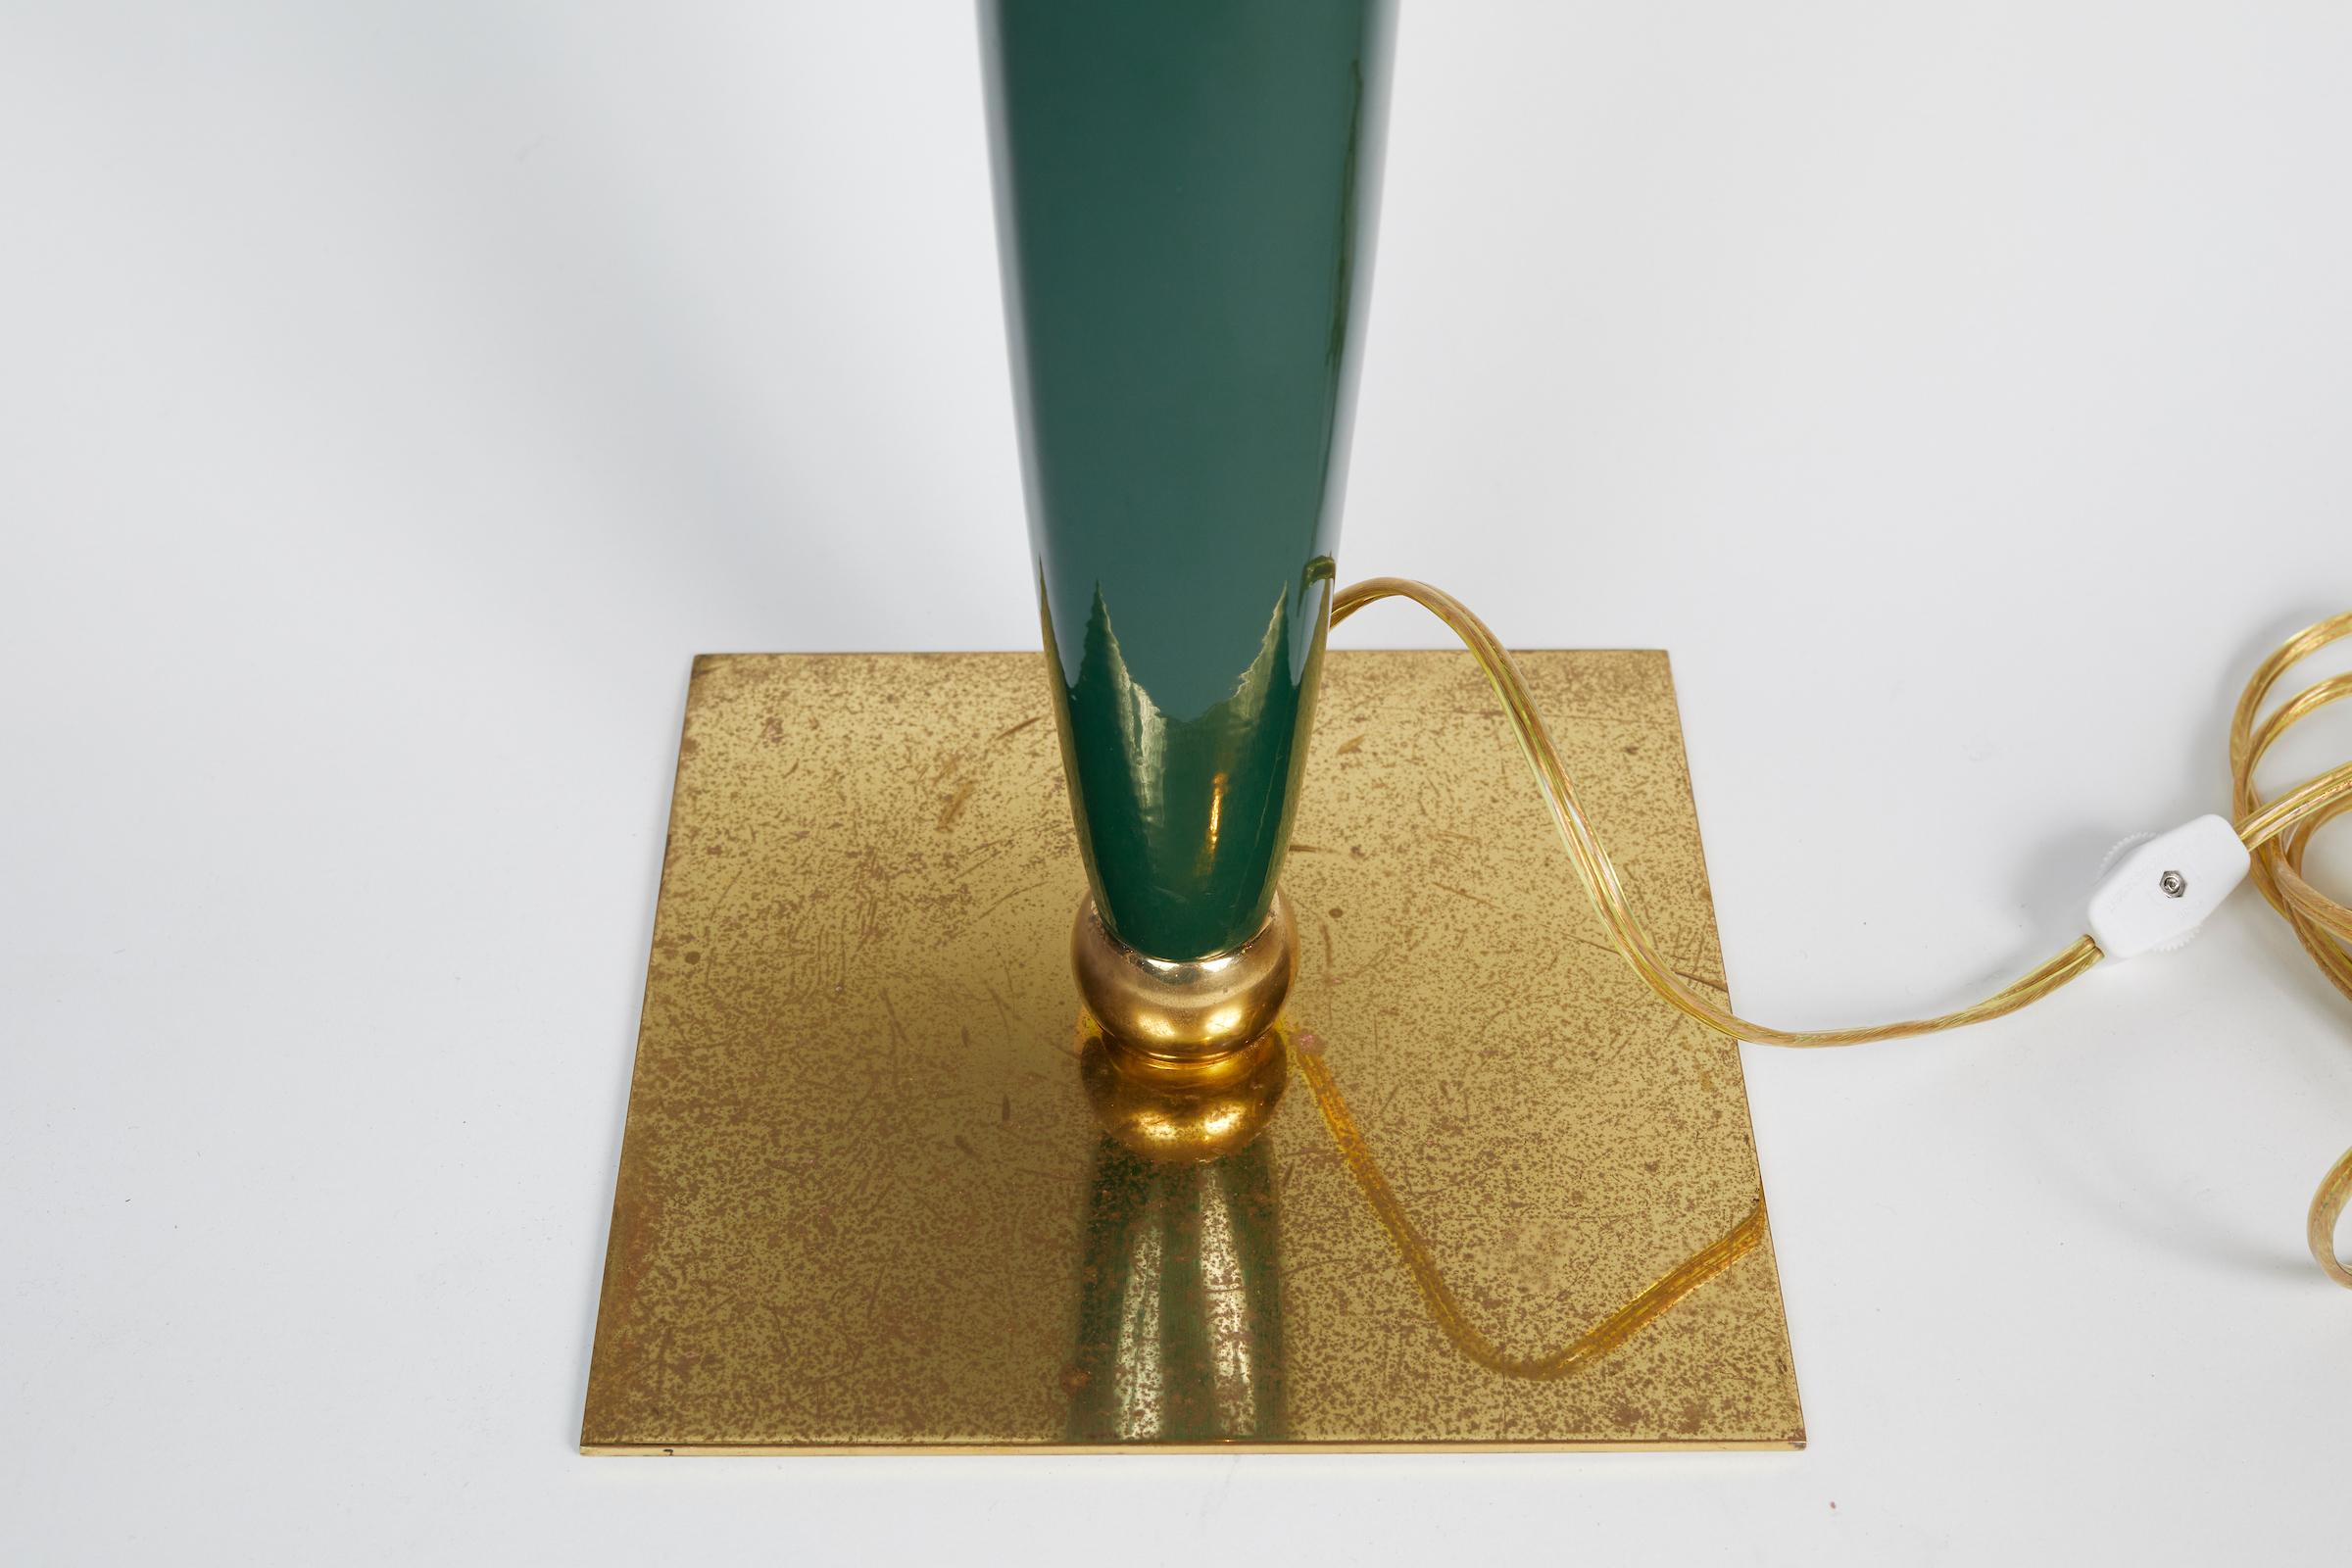 French Stylish Ceramic and Brass Table Lamp Designed by Hilton Mcconico